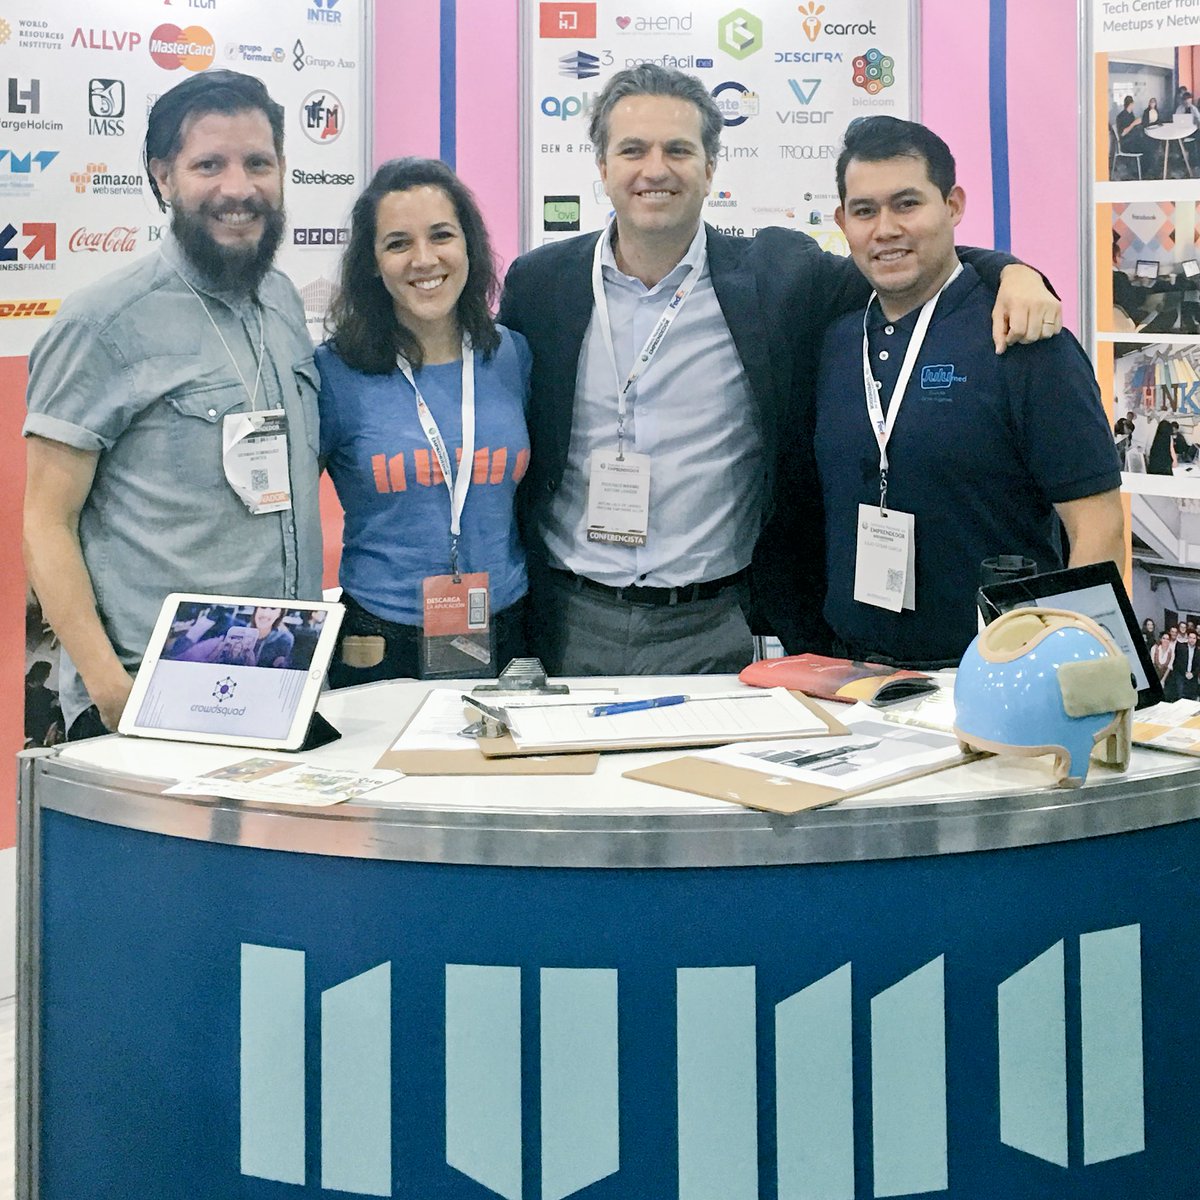 Dropping by the @NUMA_mx booth. Great team of founders and Numans! #Techfortomorrow.